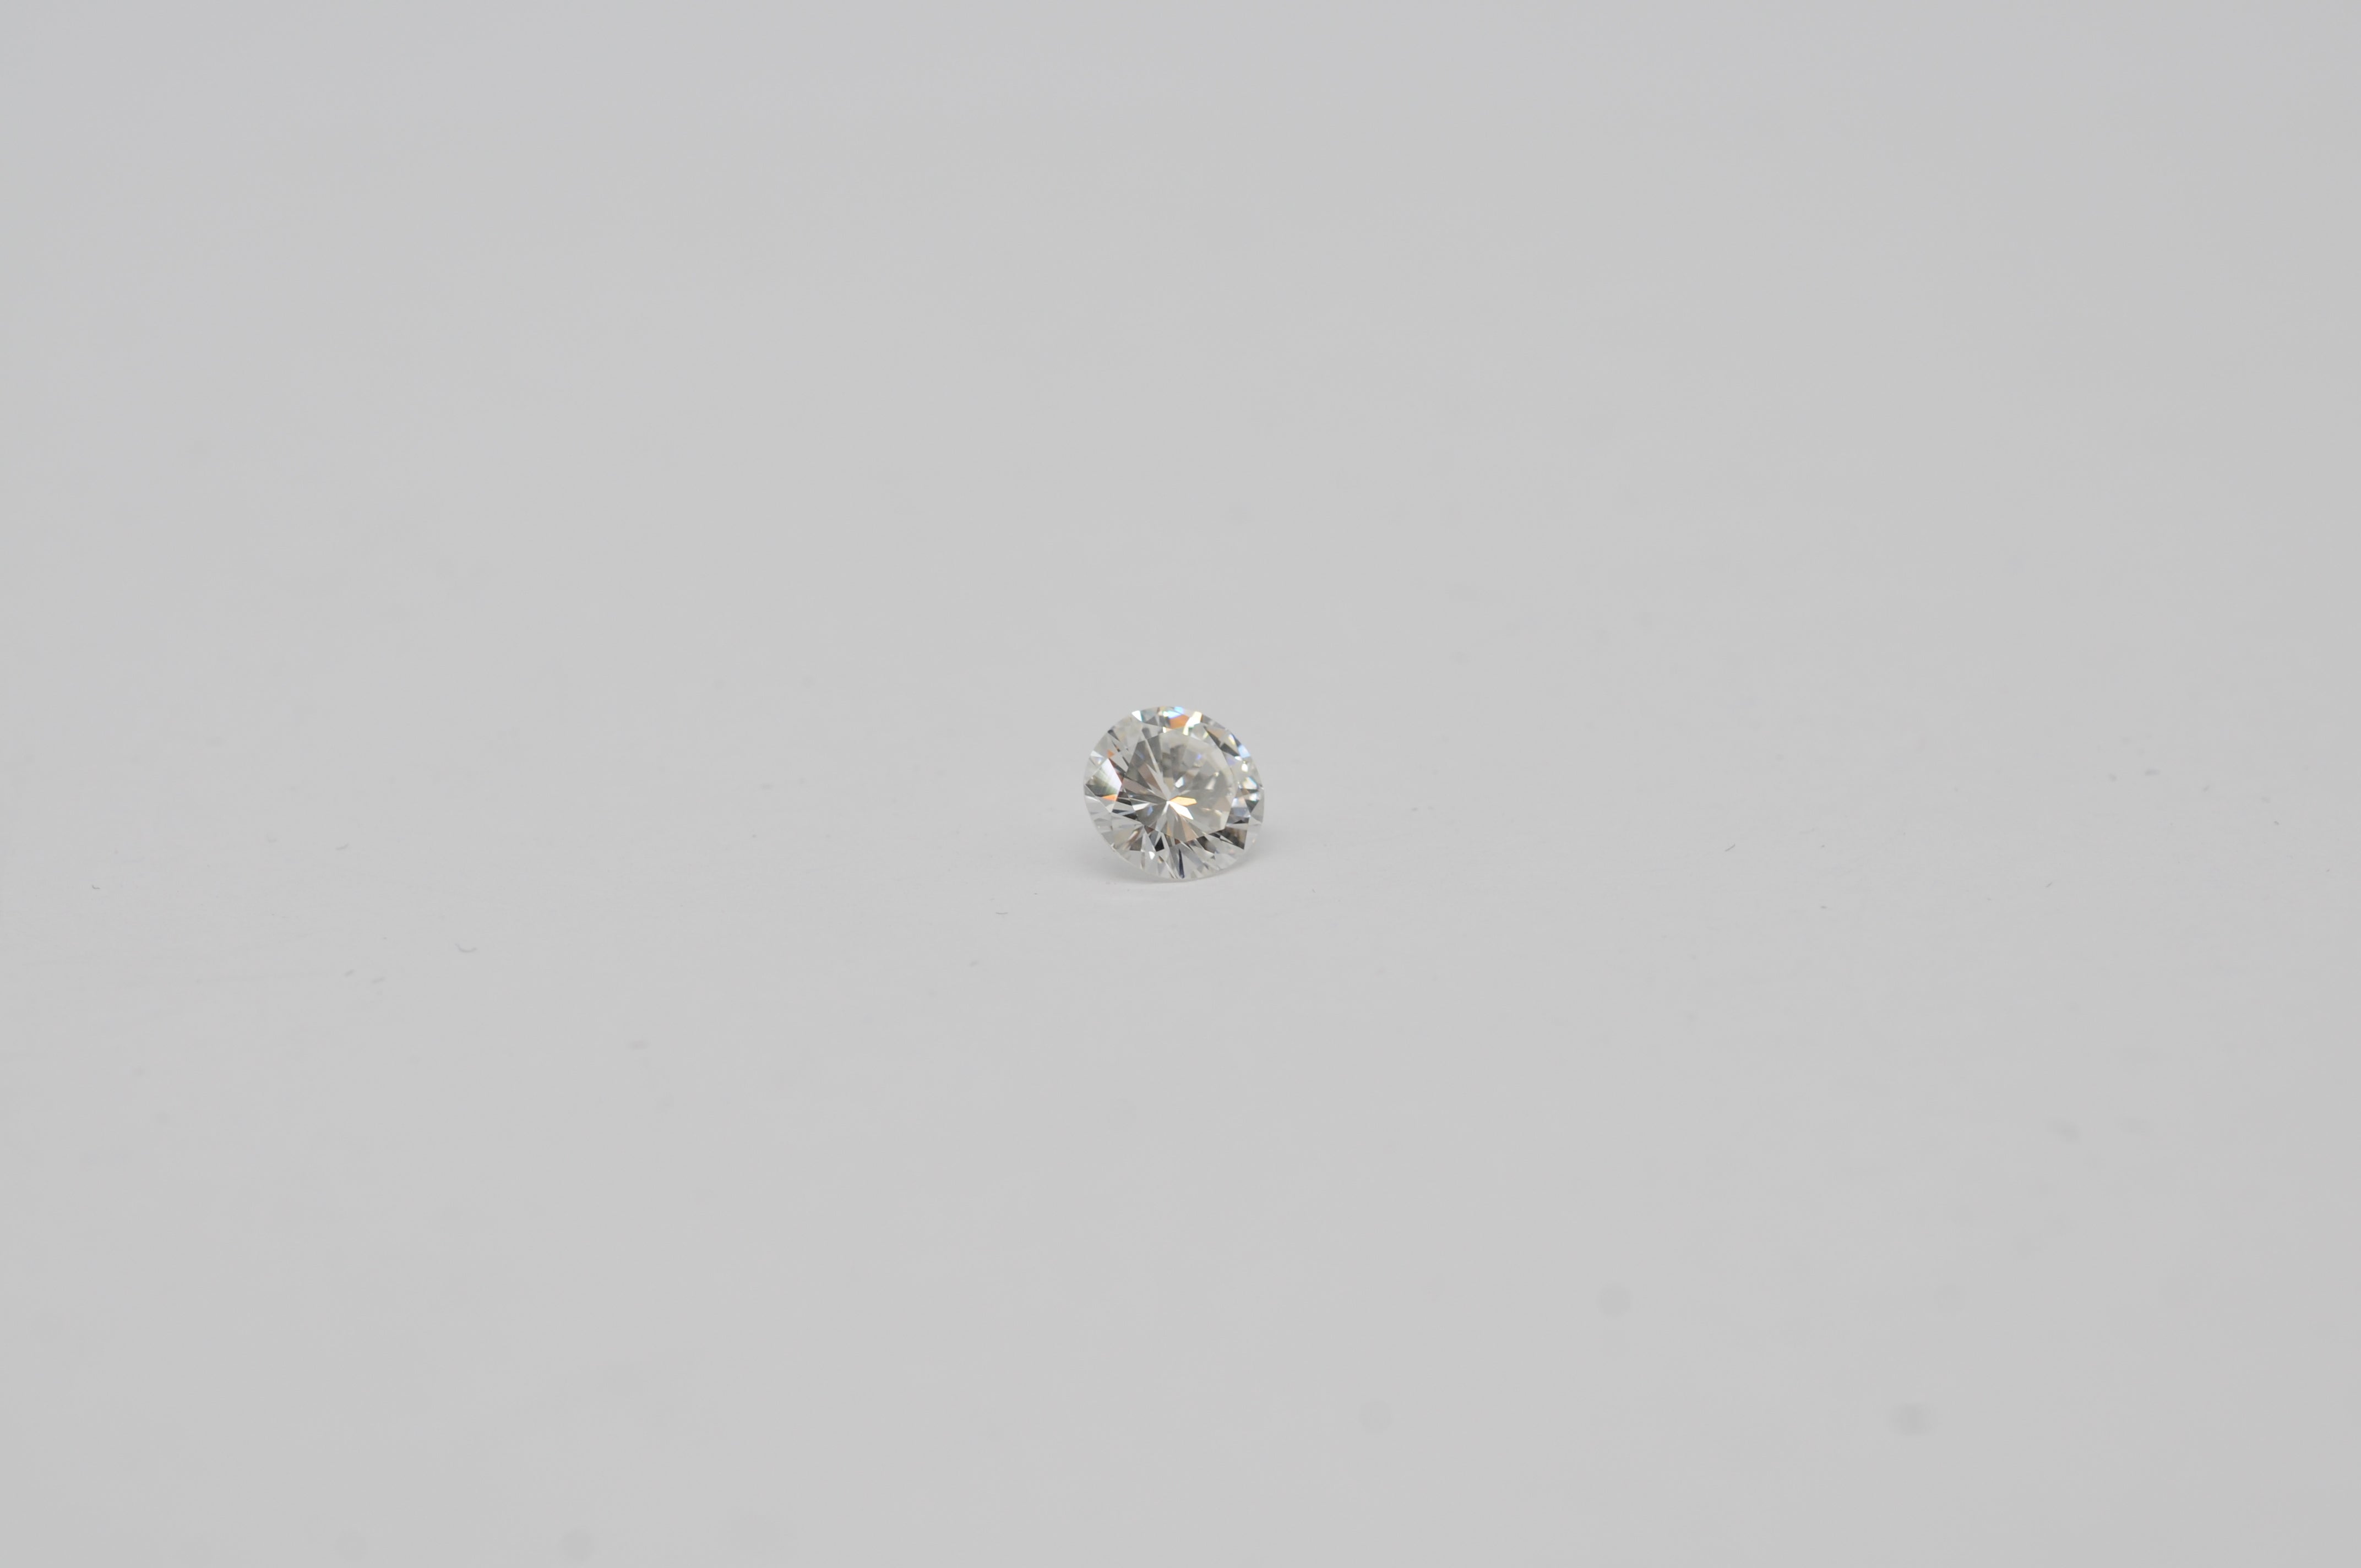 diamond, a Brilliant cut gem with a weight of 1.06 carats. extraordinary qualities that define its exquisite beauty:

Diamond Details:

Shape: Brilliant
Weight: 1.06 carats
Clarity Grade: Internally Flawless (IF), loupe-clean (No visible inclusions